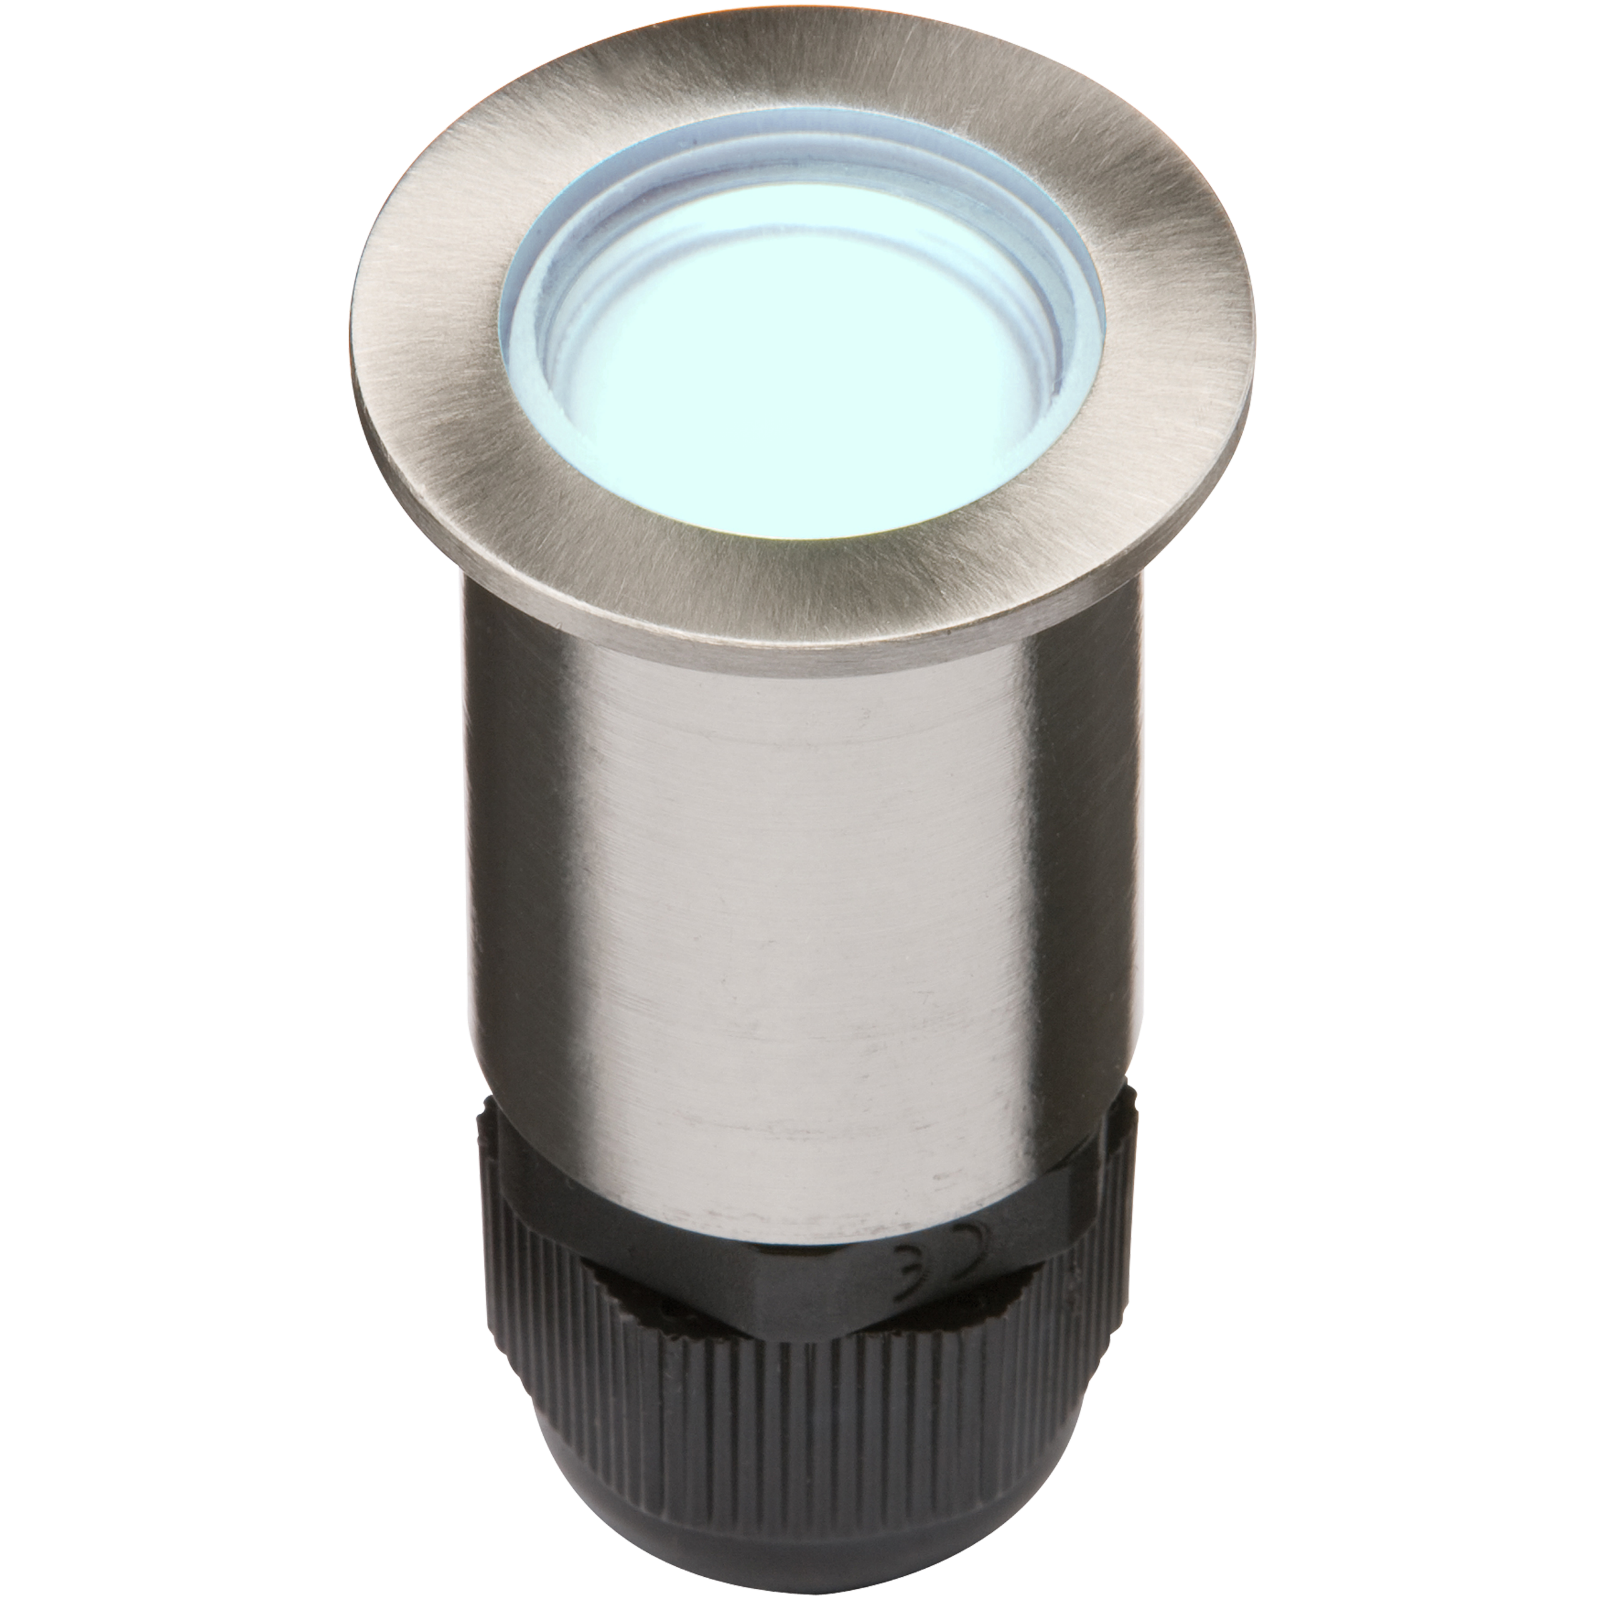 ML Accessories-4IPB IP67 24V Small Stainless Steel Ground Fitting 4 x Blue LED